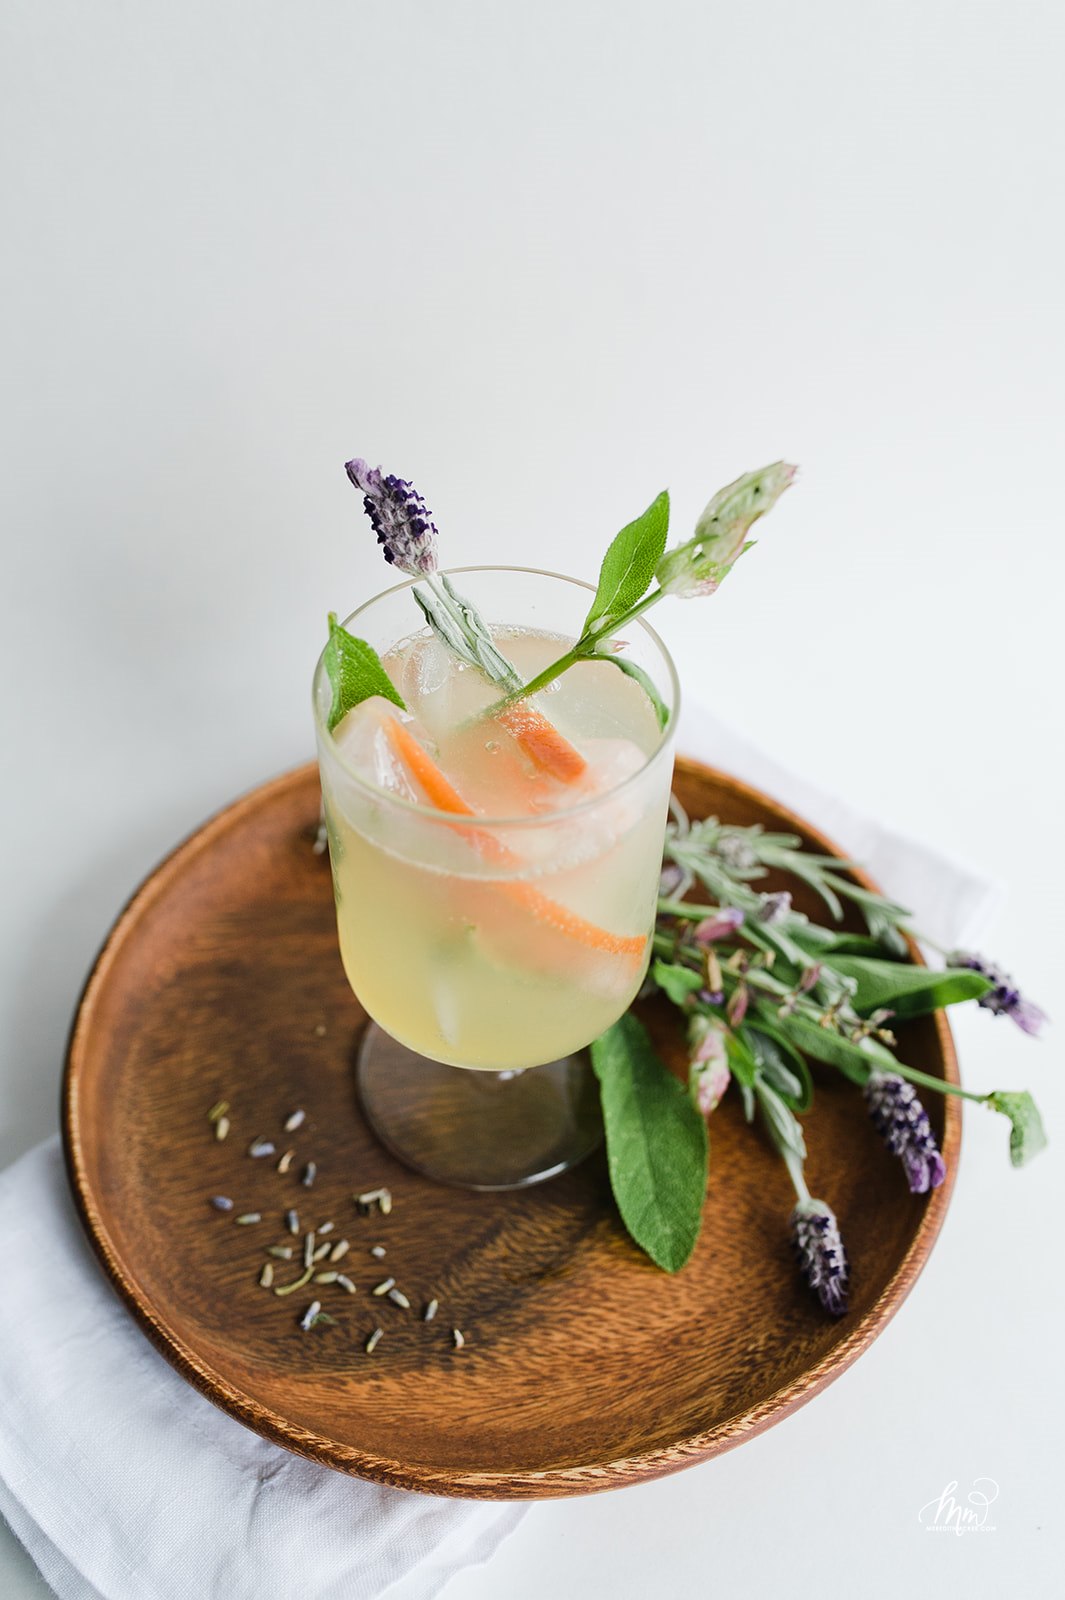 Cocktail Recipe of the Week: the Seattle Sling, and also introducing our first Spring Launch flavor, Lemon Herb!